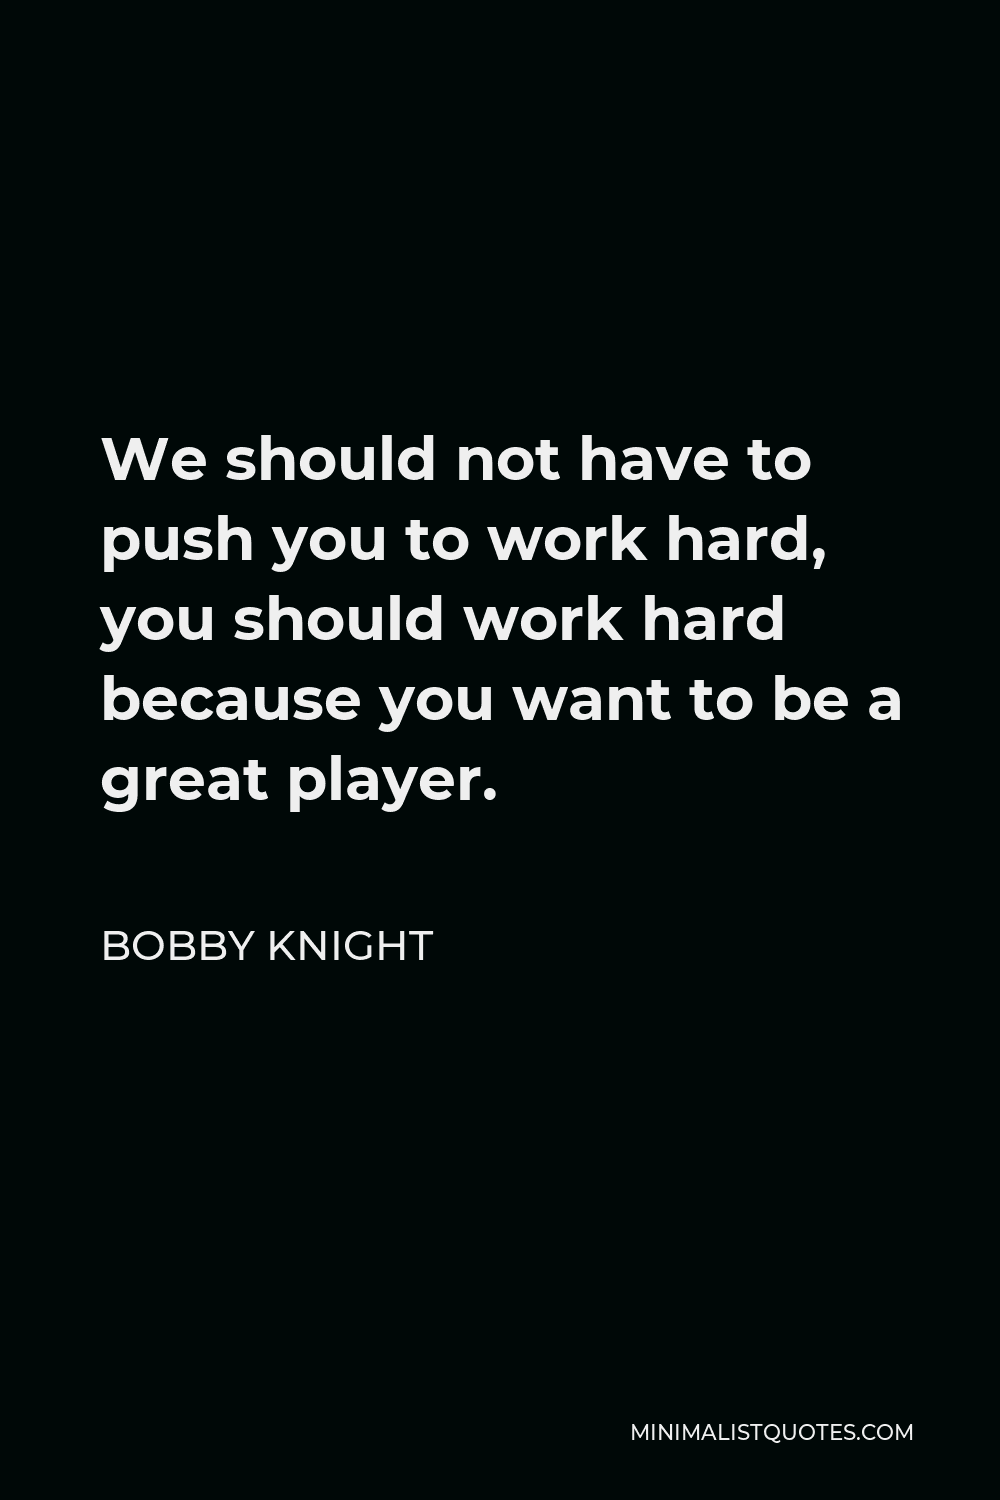 Bobby Knight Quote - We should not have to push you to work hard, you should work hard because you want to be a great player.